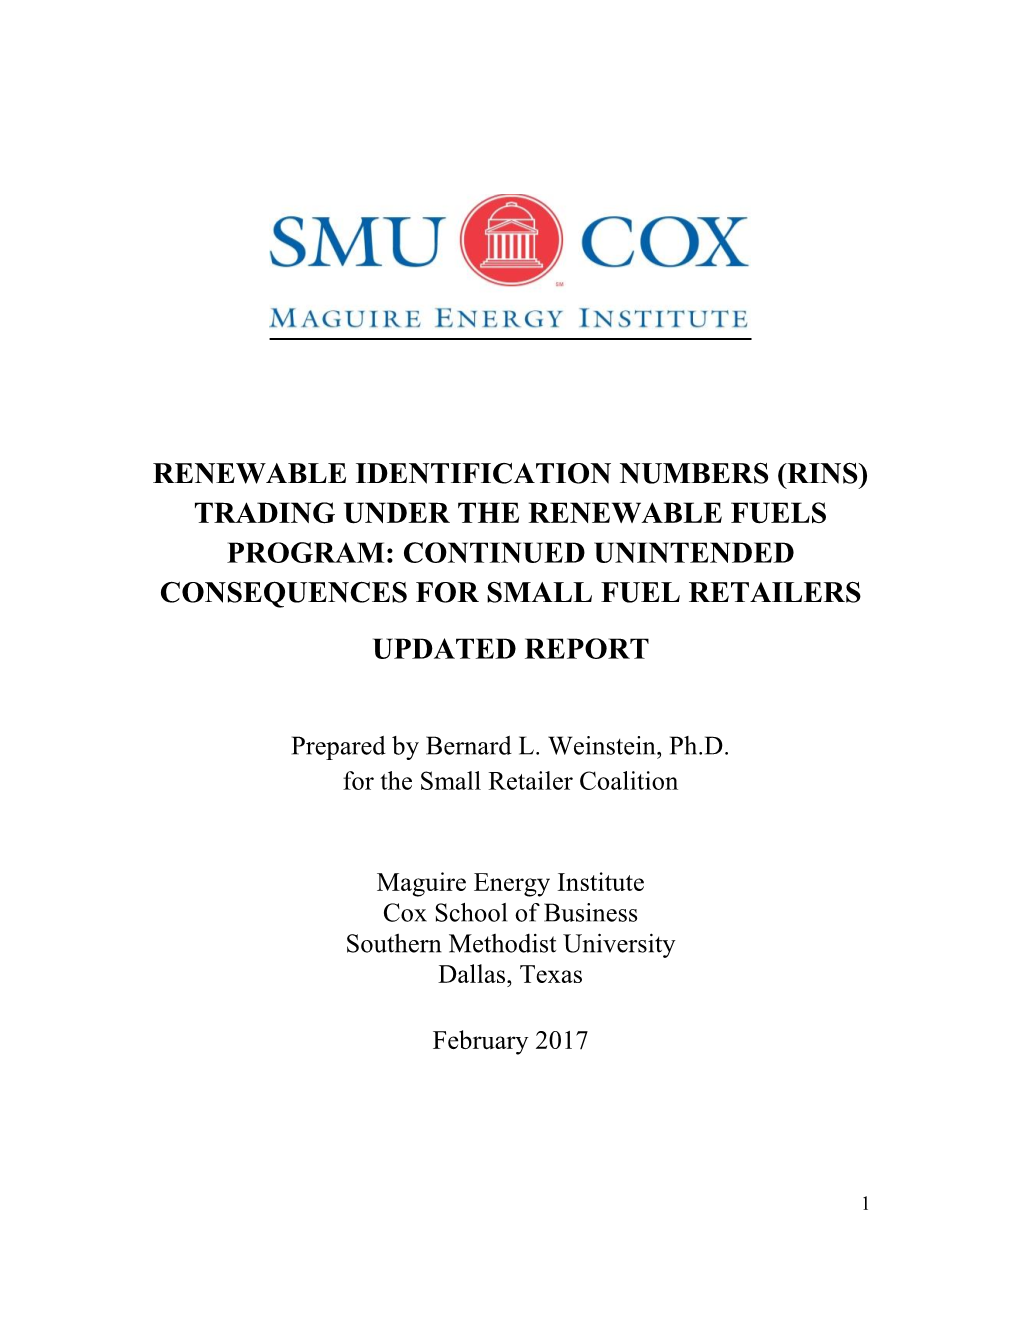 Rins) Trading Under the Renewable Fuels Program: Continued Unintended Consequences for Small Fuel Retailers Updated Report